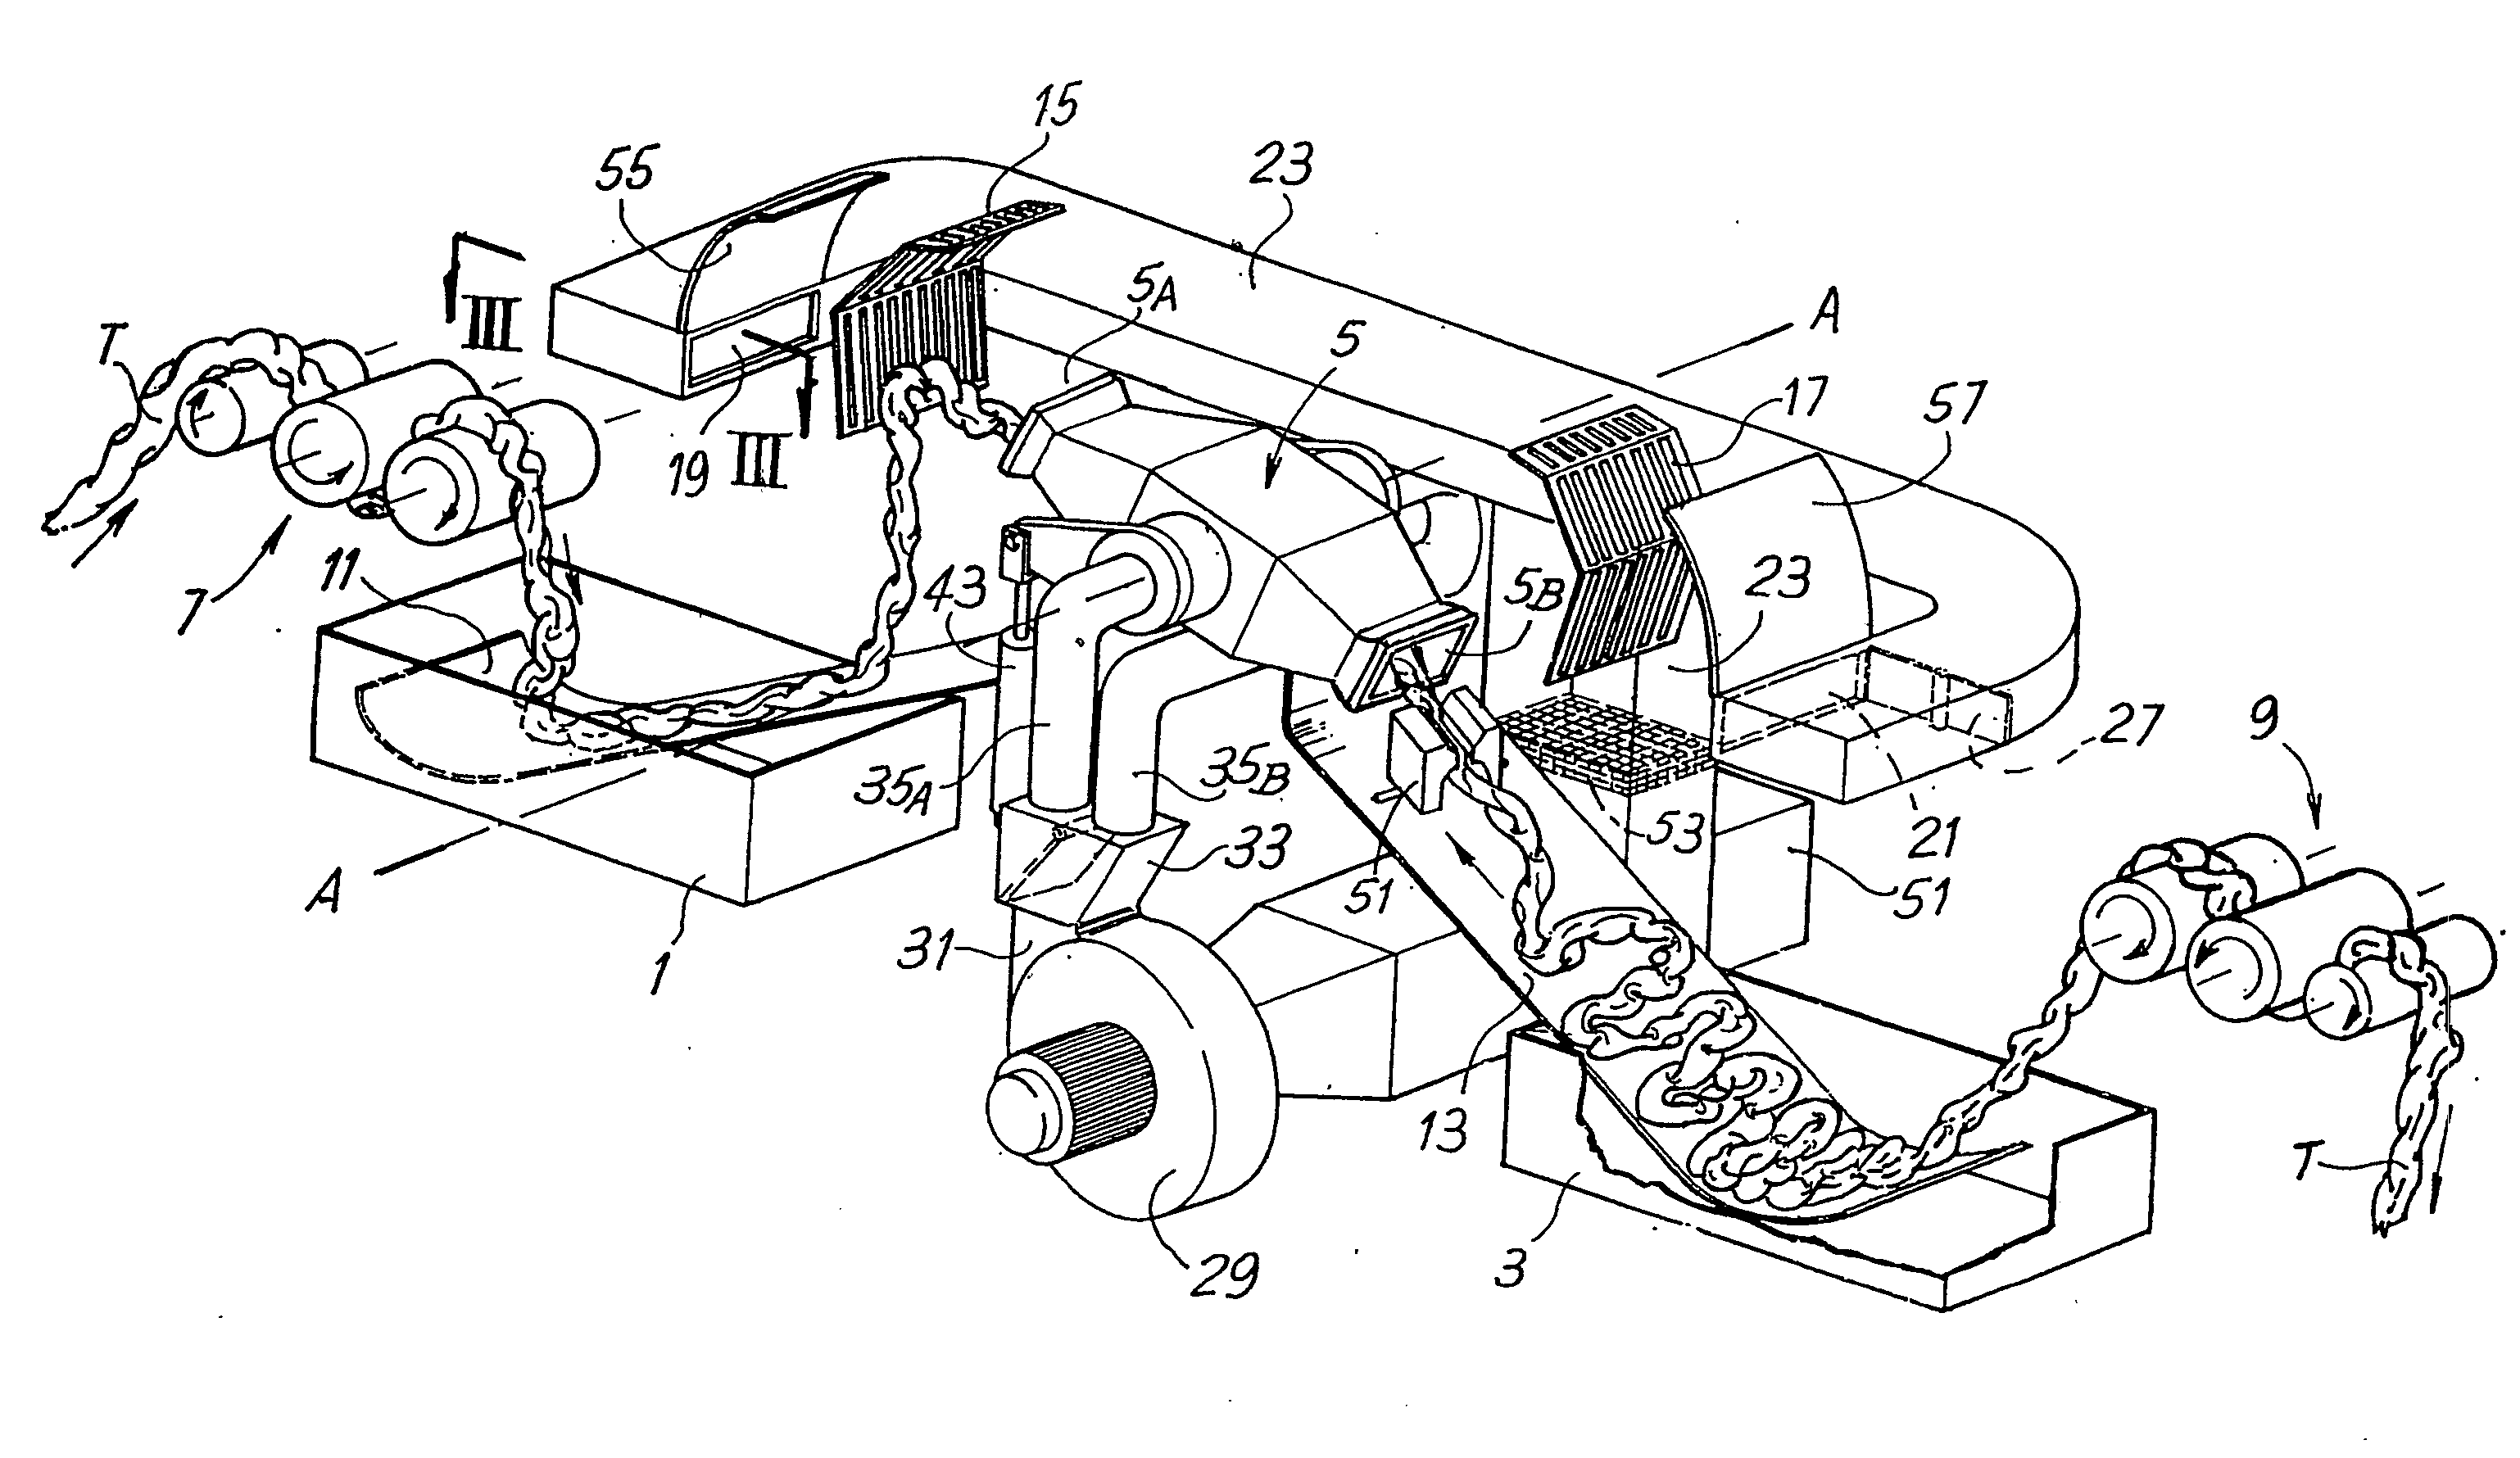 Machine and method for the continuous treatment of a fabric